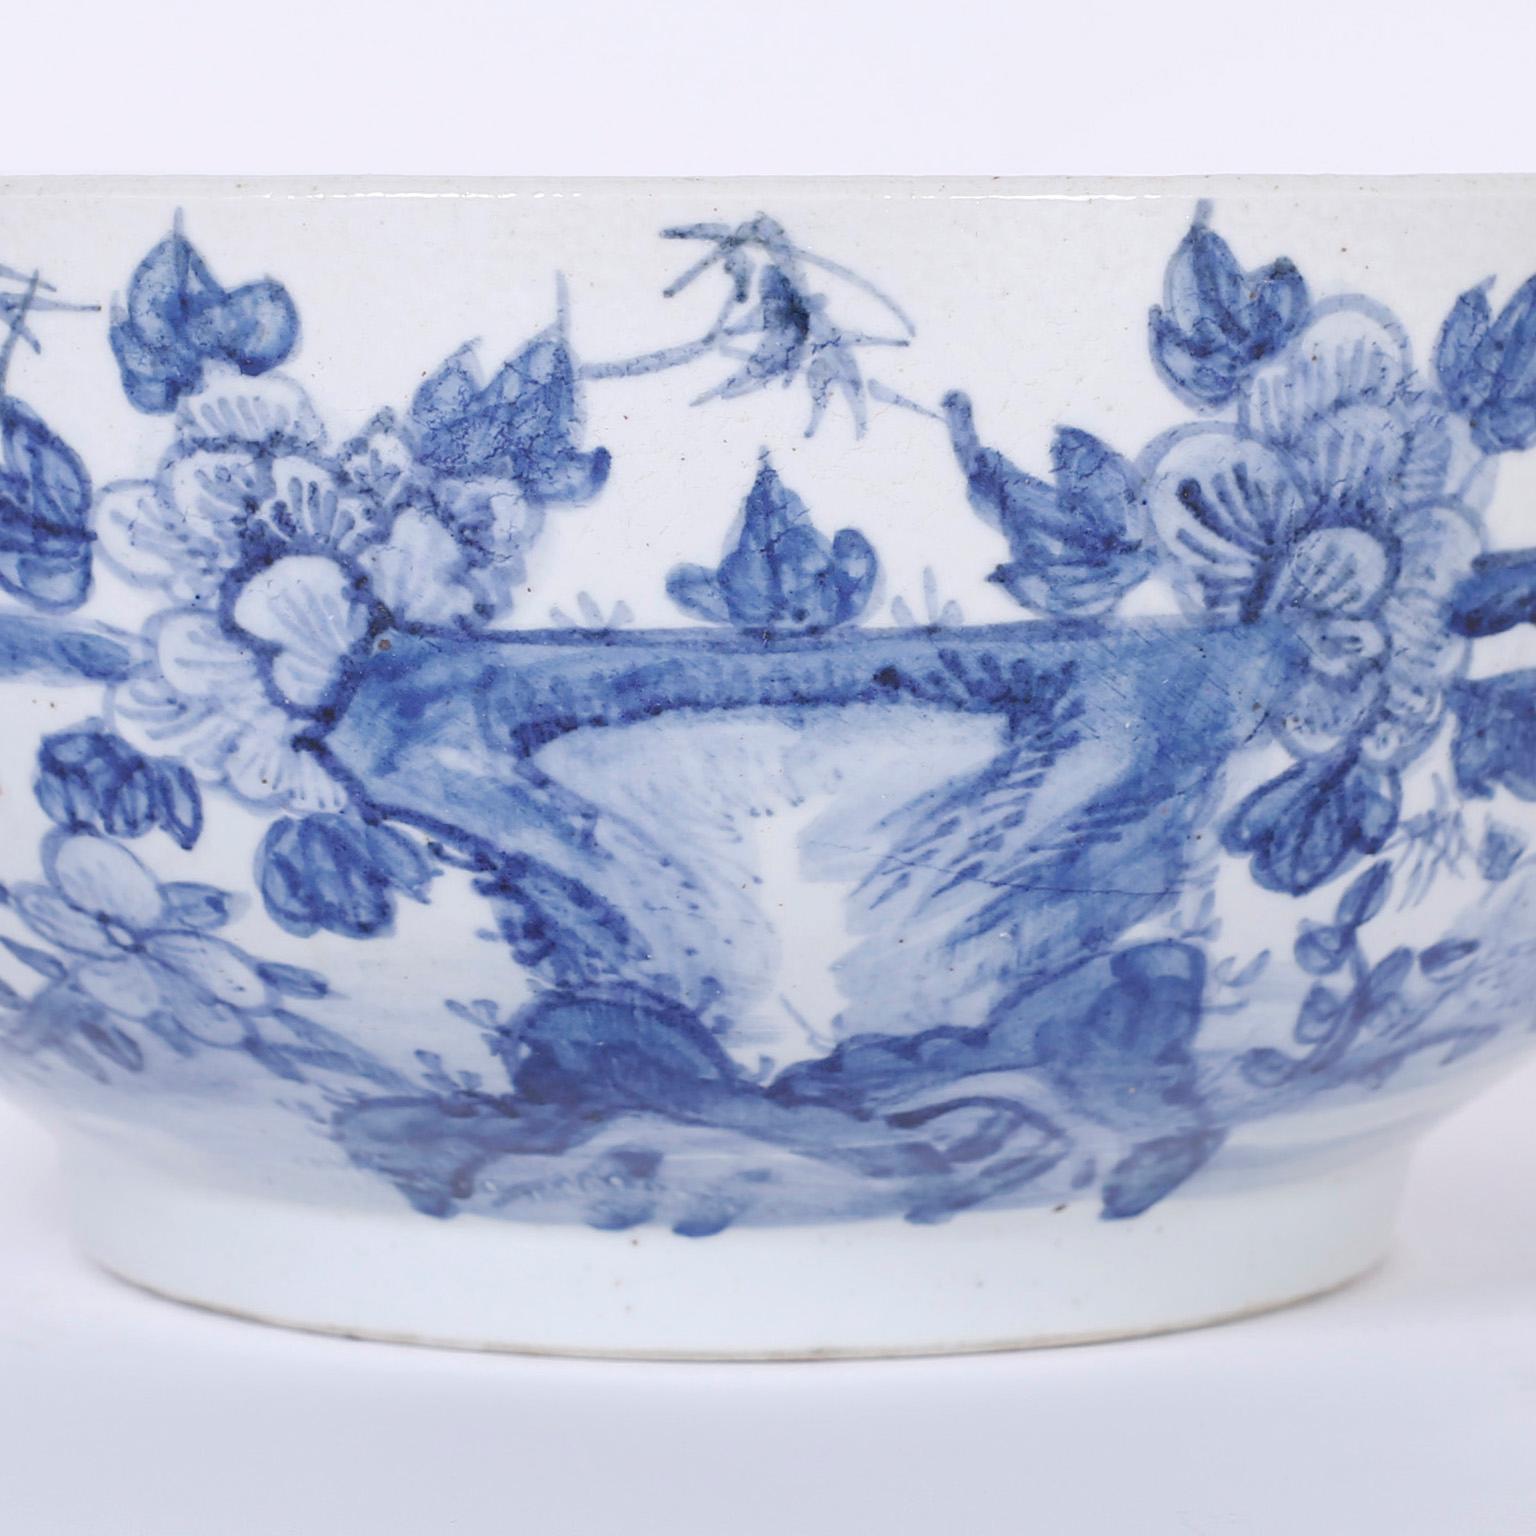 Striking blue and white Chinese porcelain bowl, in the Chinese Export manner, featuring a robust scale and decorated in front with birds and flowers, the simple back has two birds.